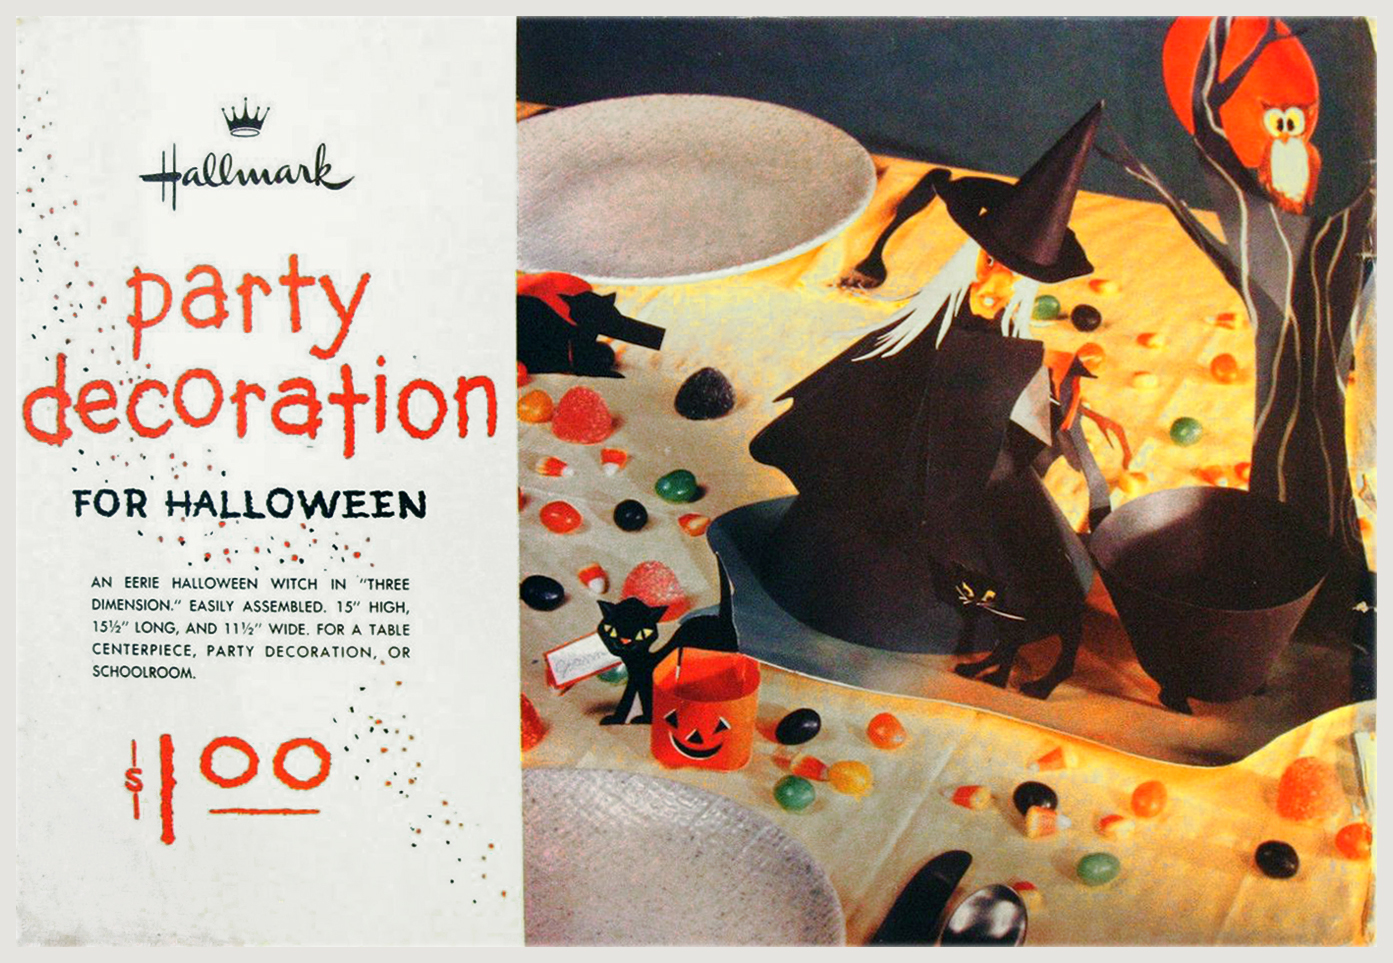 The Hallmark party decoration for Halloween by Hallmark 1950's features an eerie Halloween with in three dimension for party decoration or schoolroom, shown as a photo that will help vintage Halloween collectors with identification from the new guidebook series of The Halloween Retrospect archive.